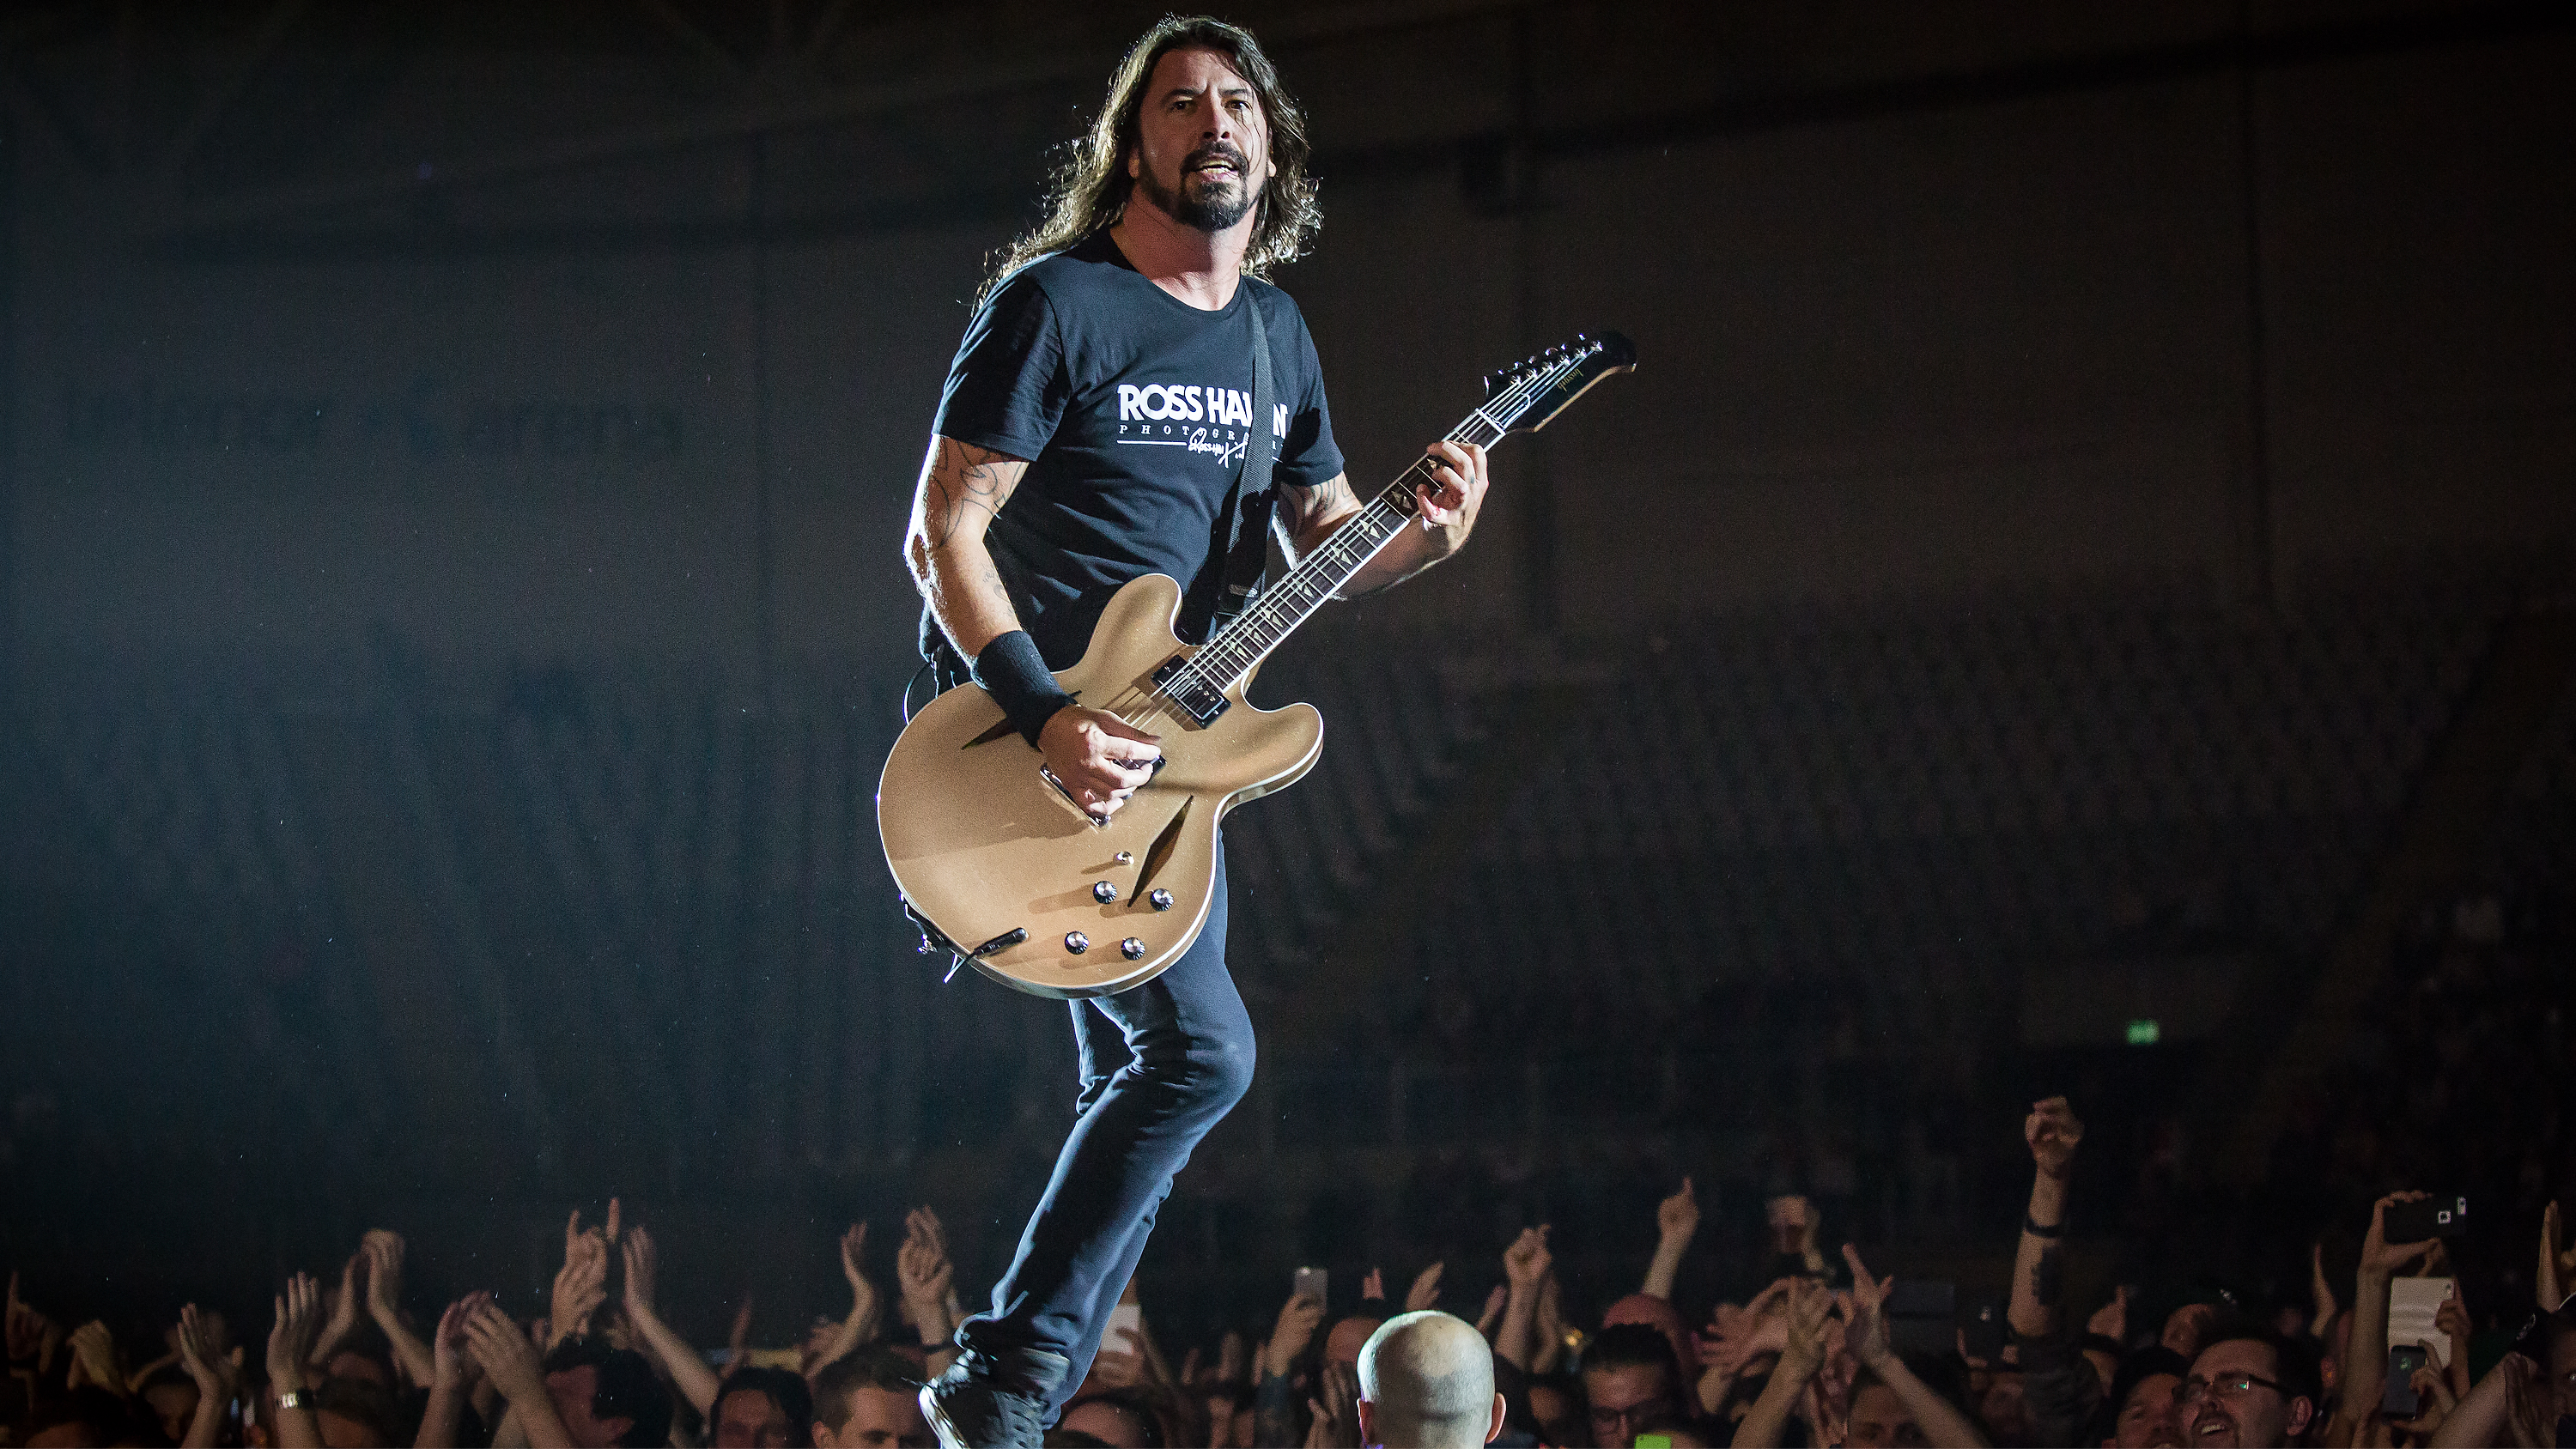 Dave Grohl, Foo Fighters